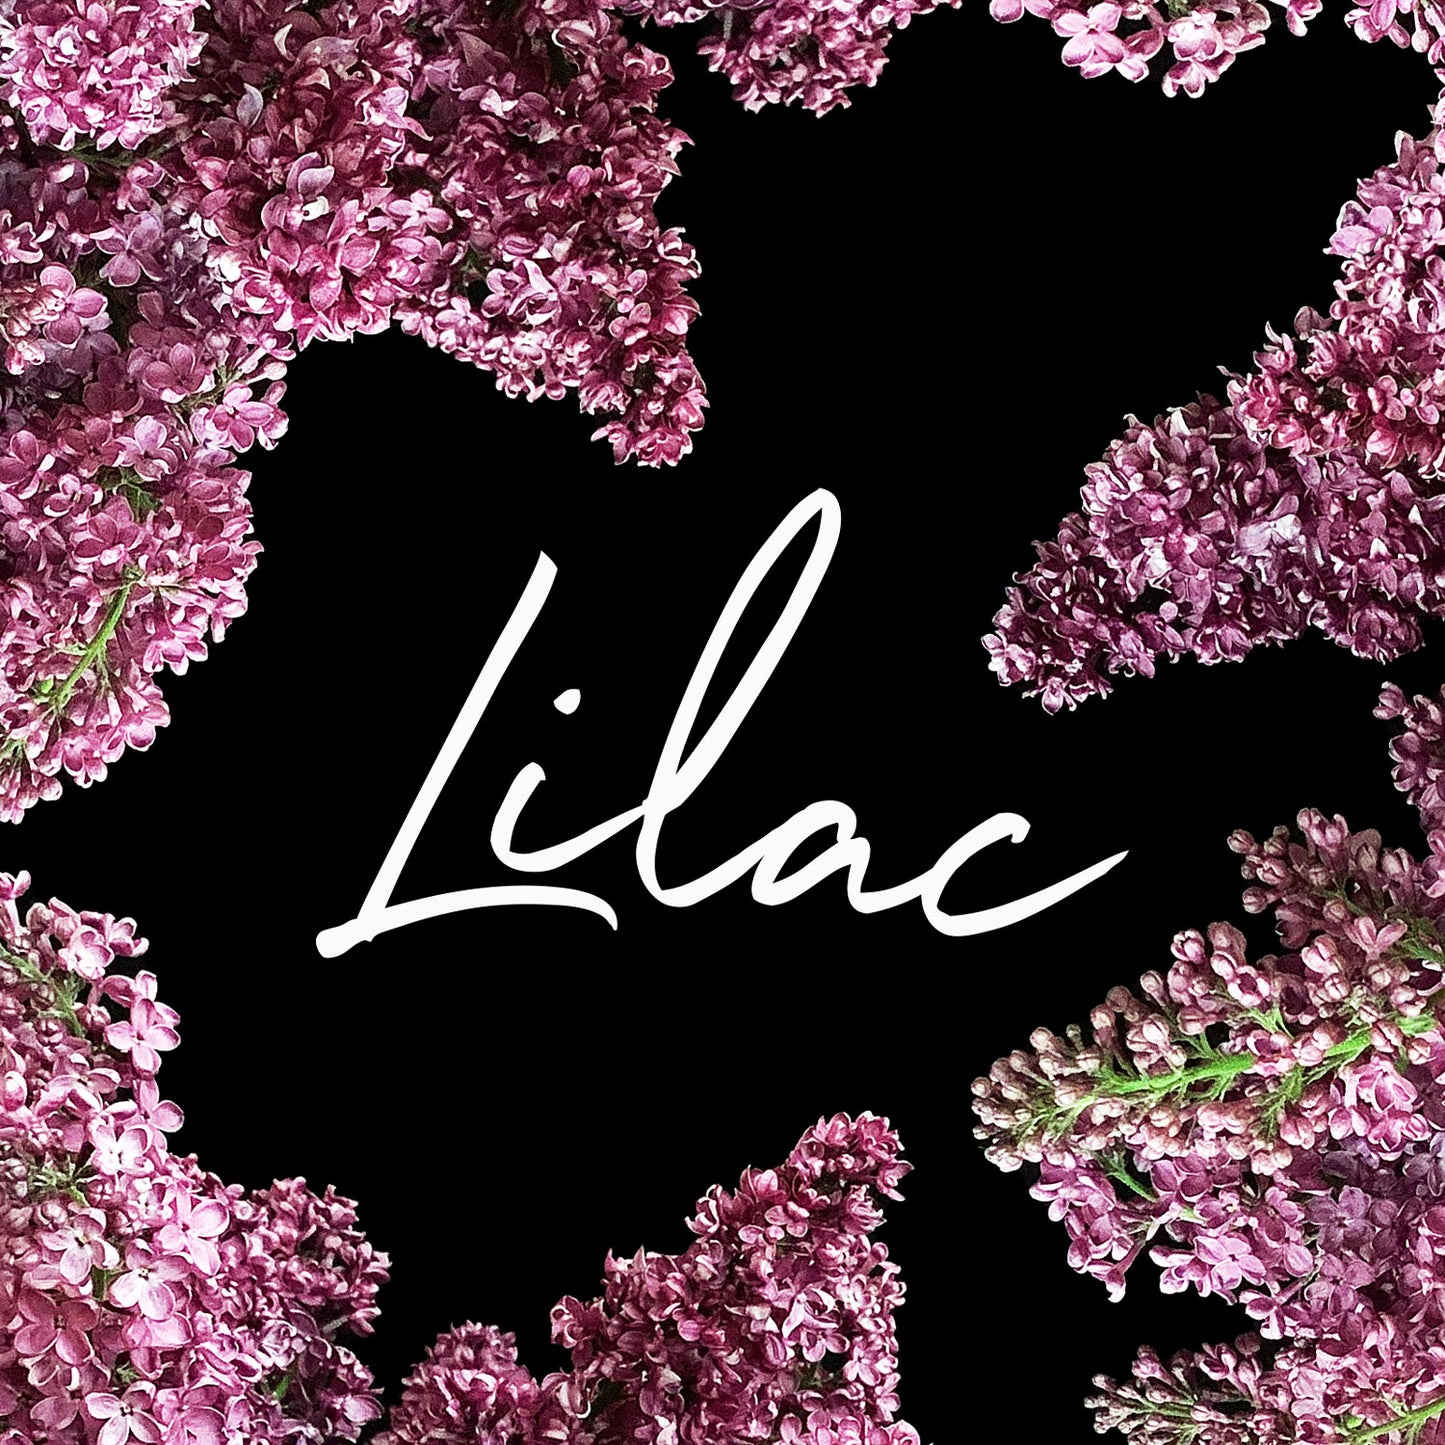 Clusters of lilac flowers surrounding the elegantly written word ‘Lilac’ on a black background.Order online for plants & flowers from the best florist in Toronto near you.